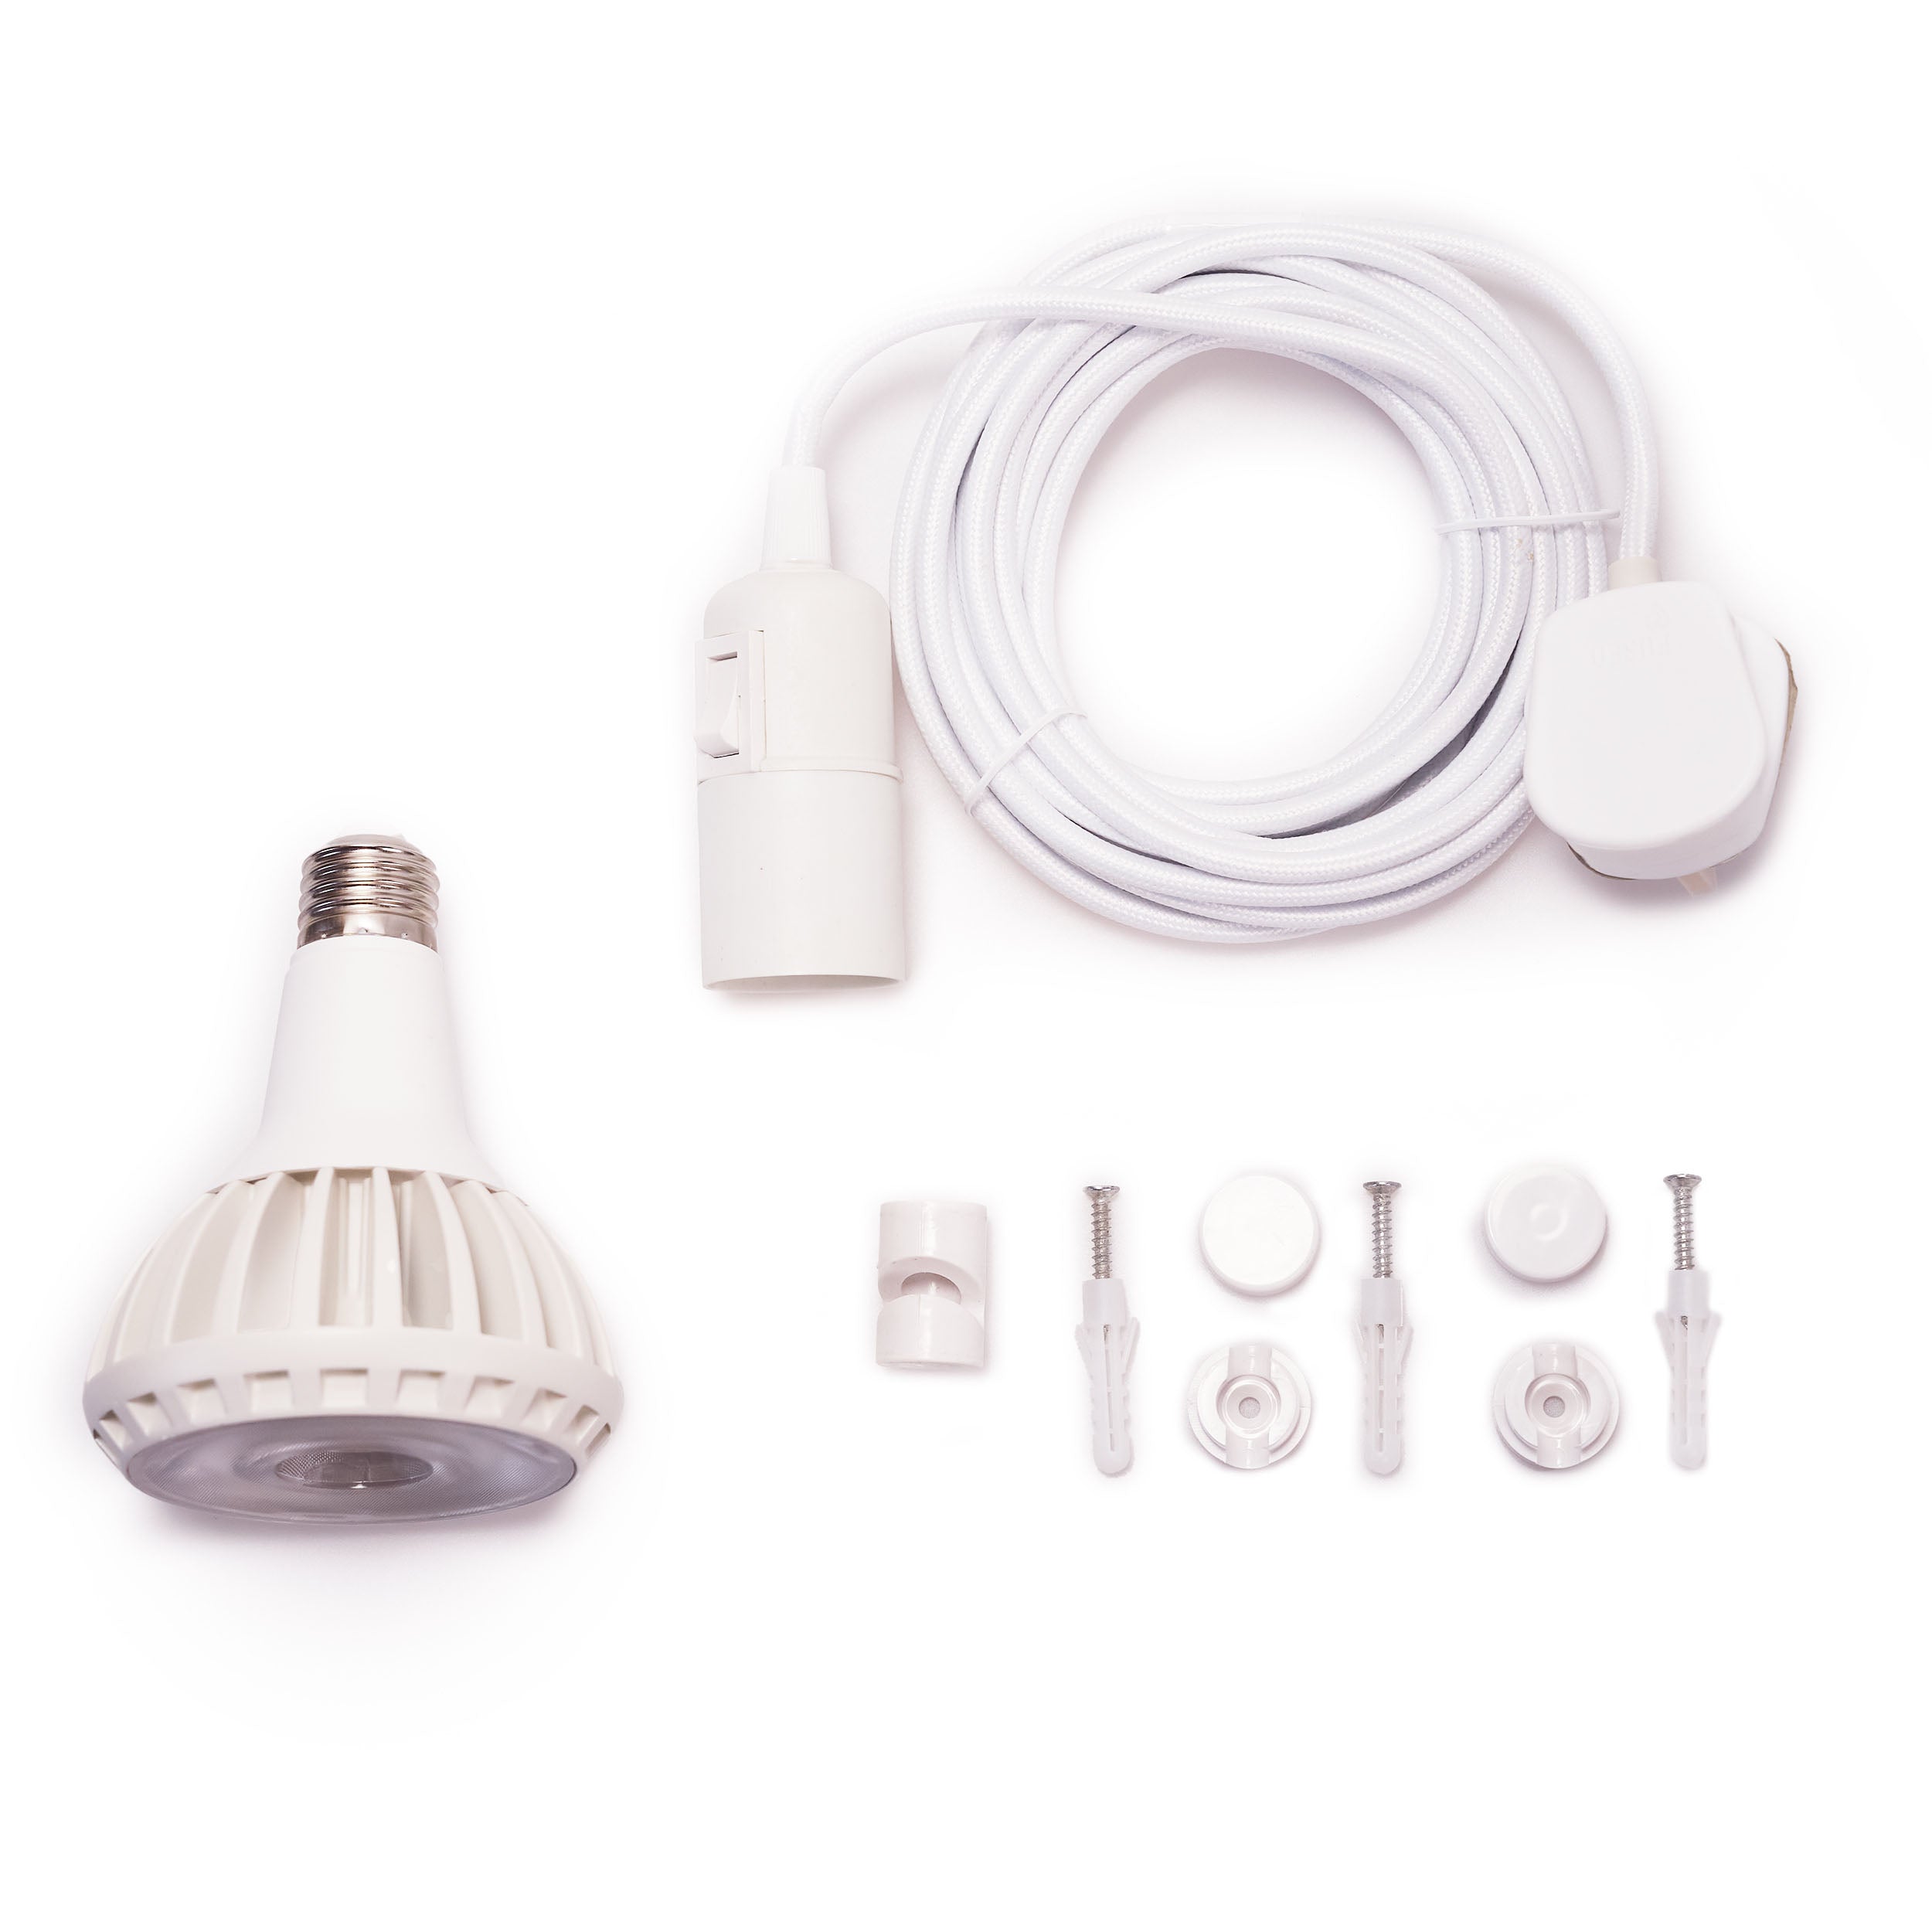 The components of the bundle: Pianta grow light bub, ceiling pendant and wall fixtures